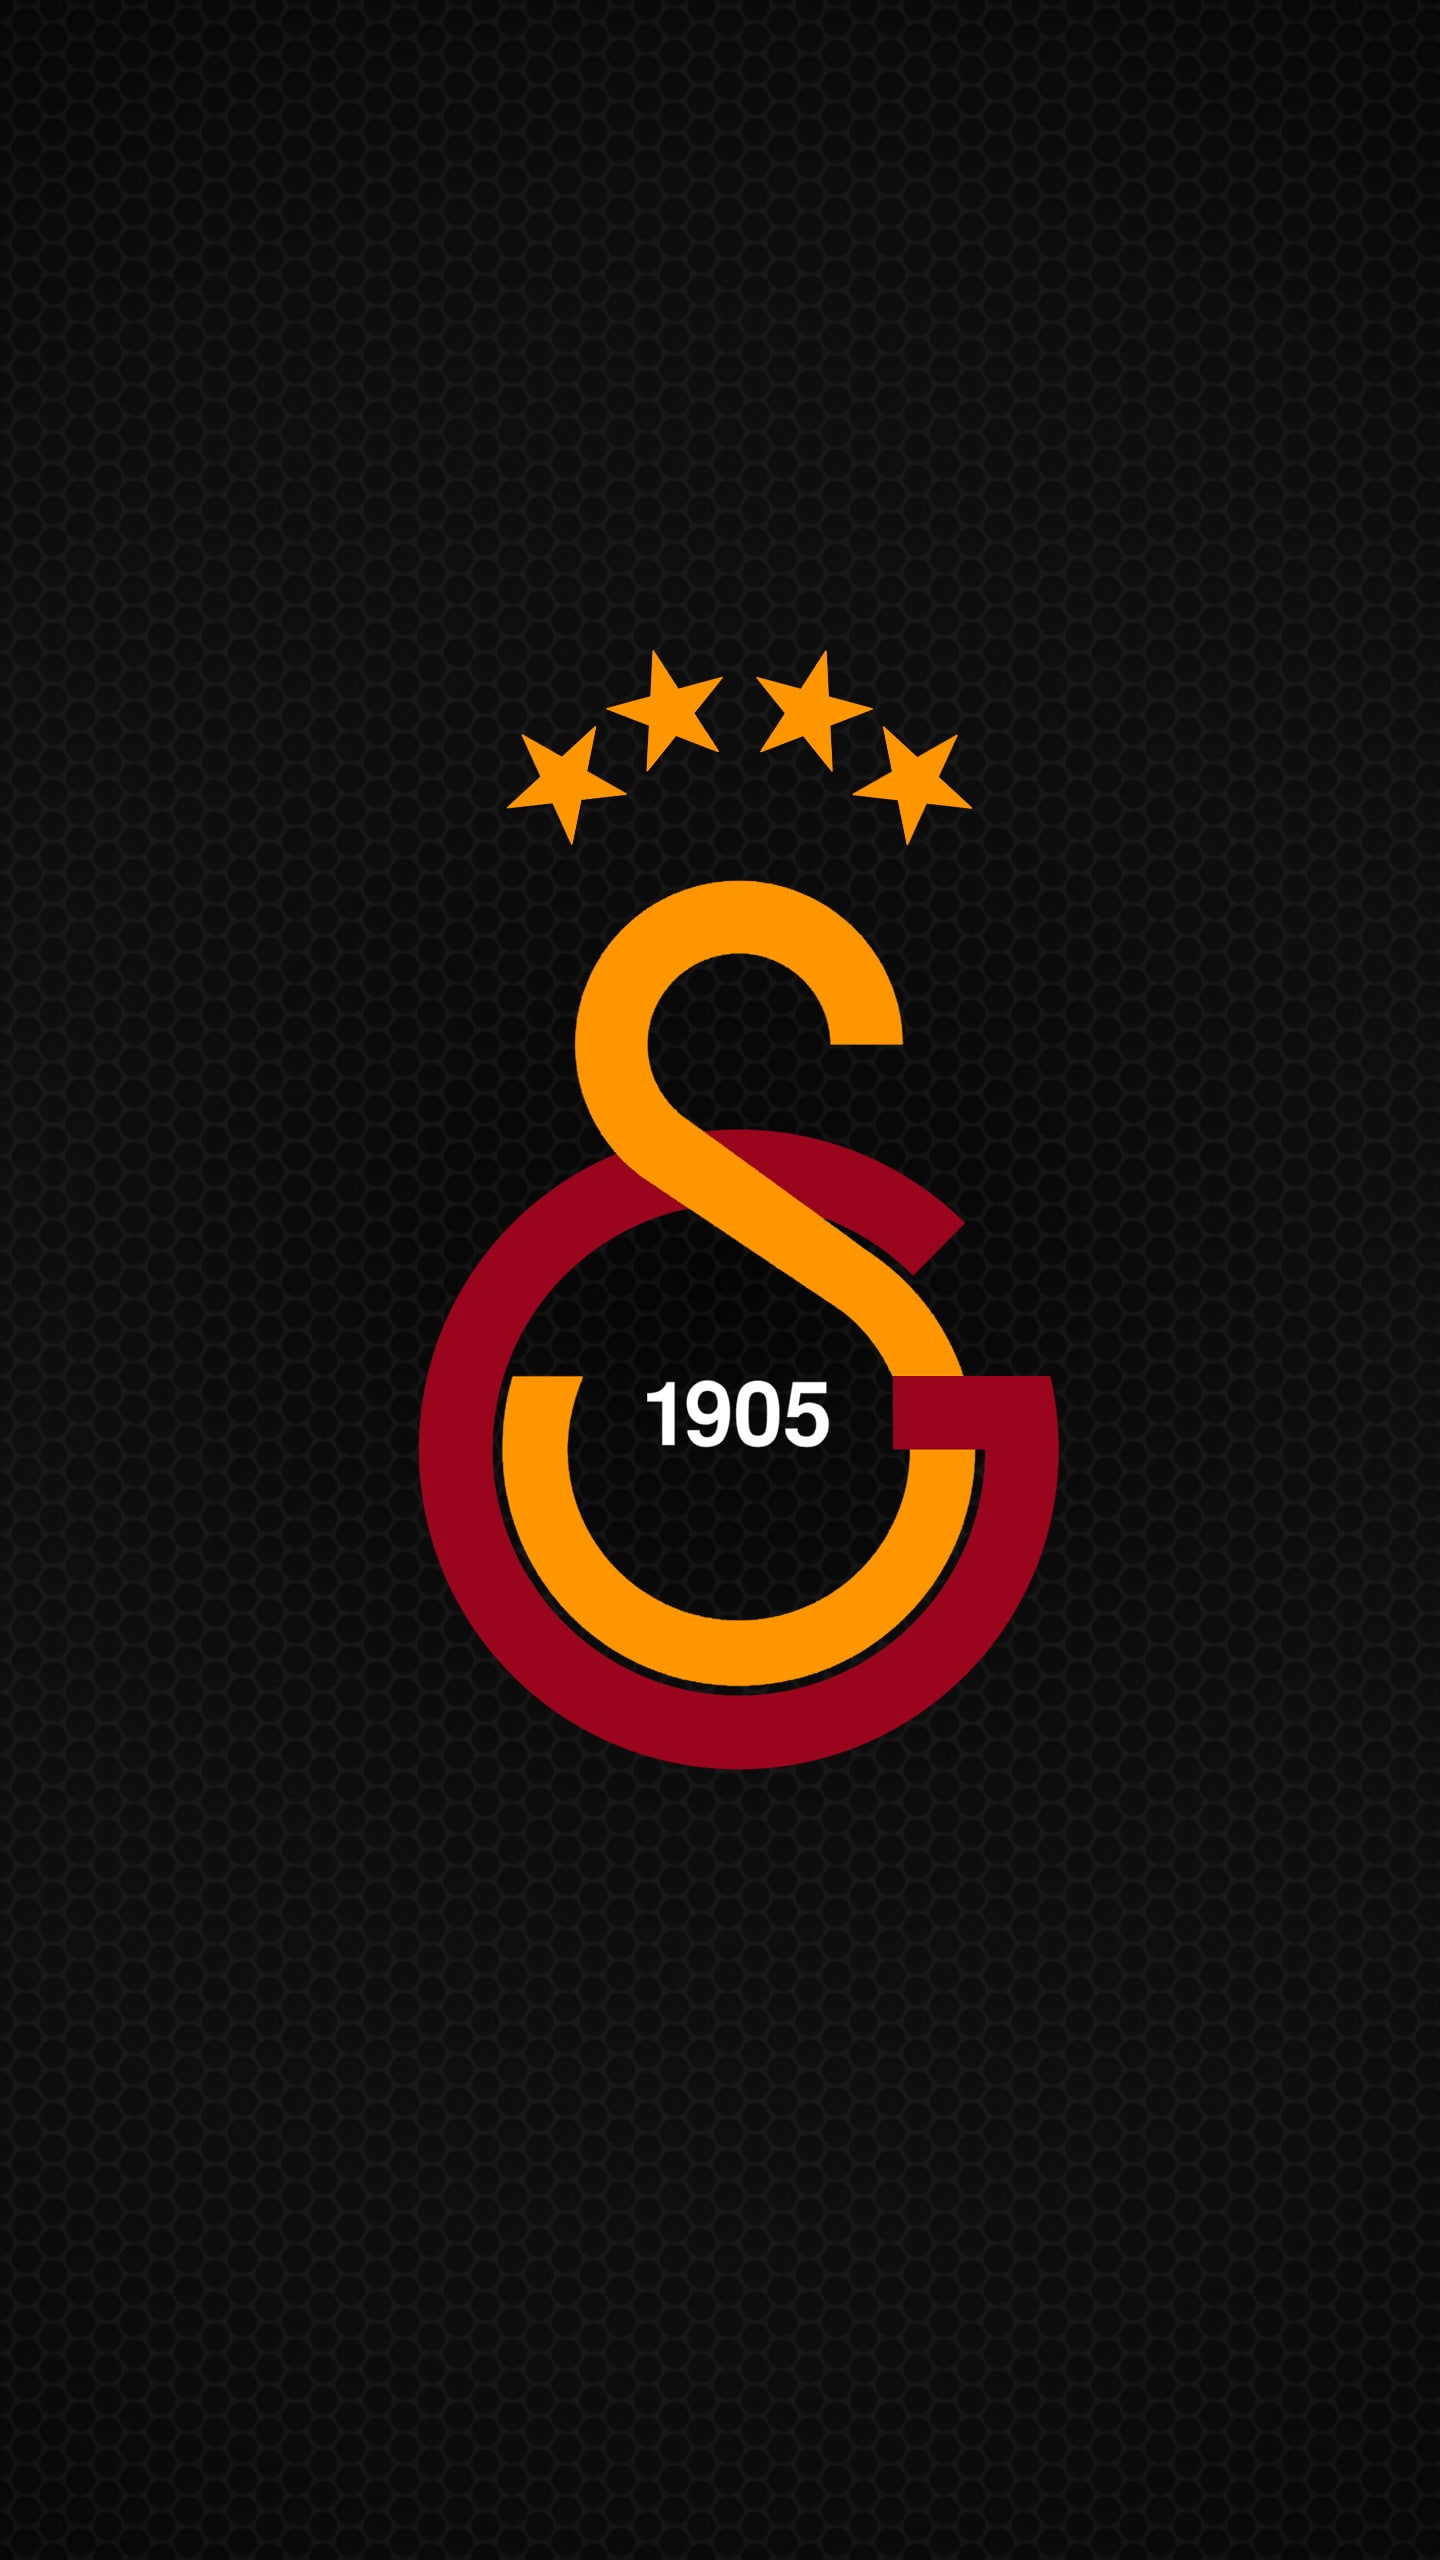 Galatasaray S.K., soccer, communication, sign, text, no people